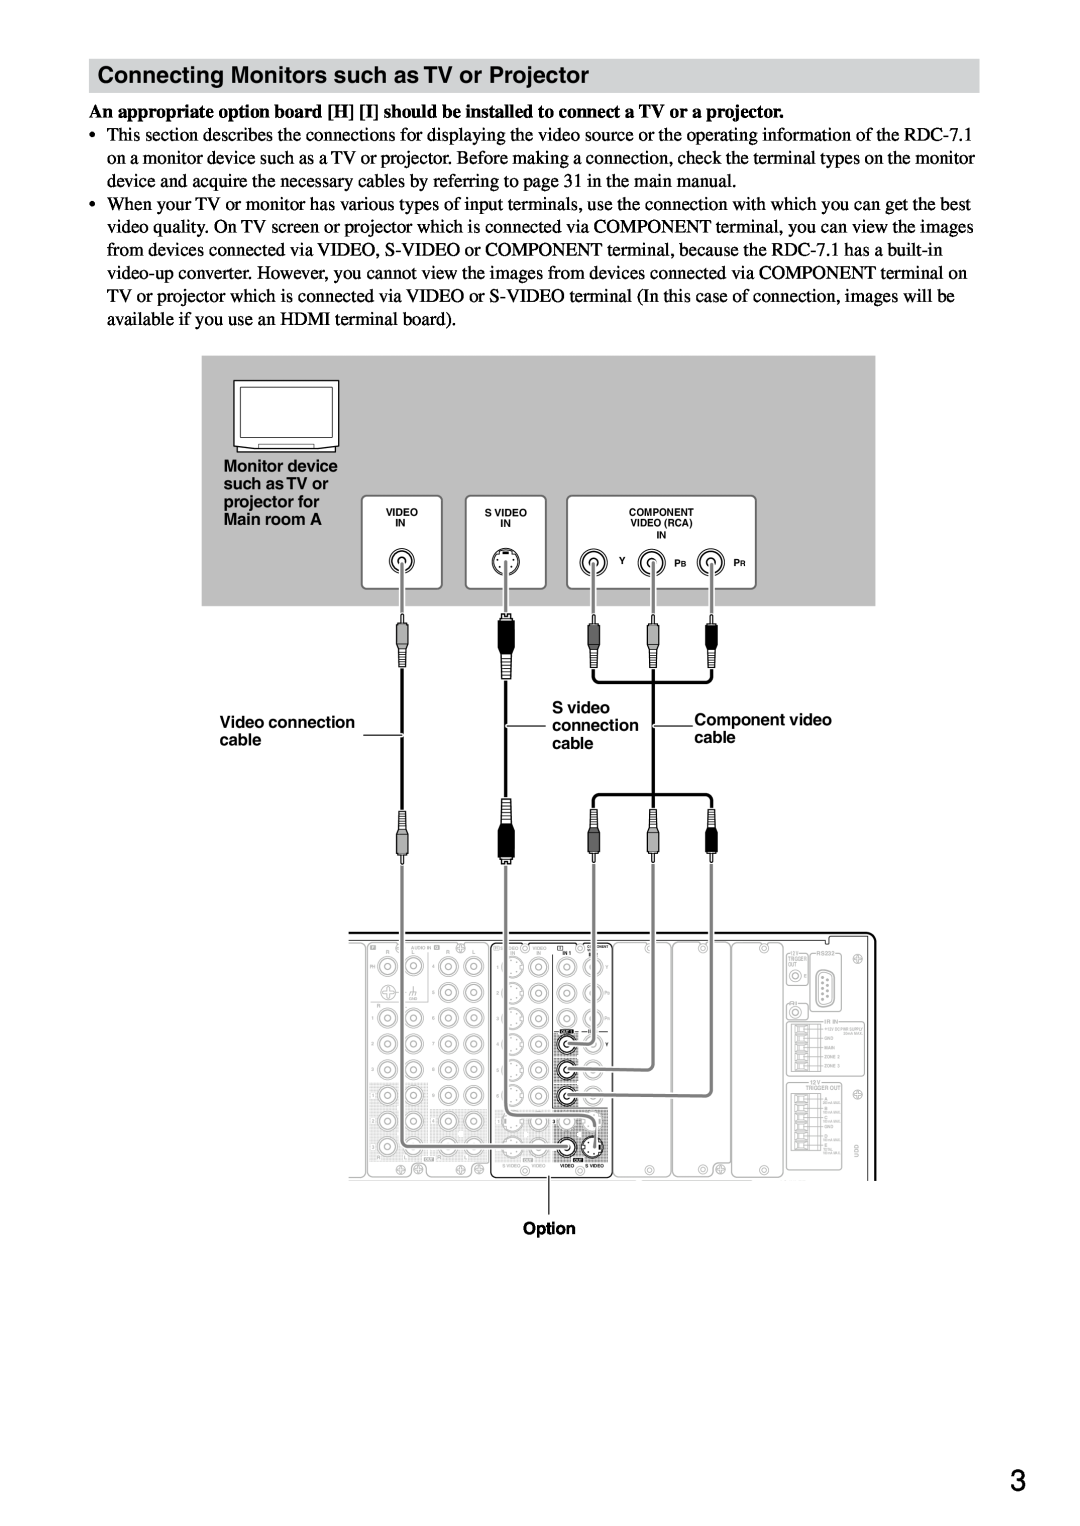 Integra RDC-7.1 instruction manual Connecting Monitors such as TV or Projector, S video, connection, cable, Option 